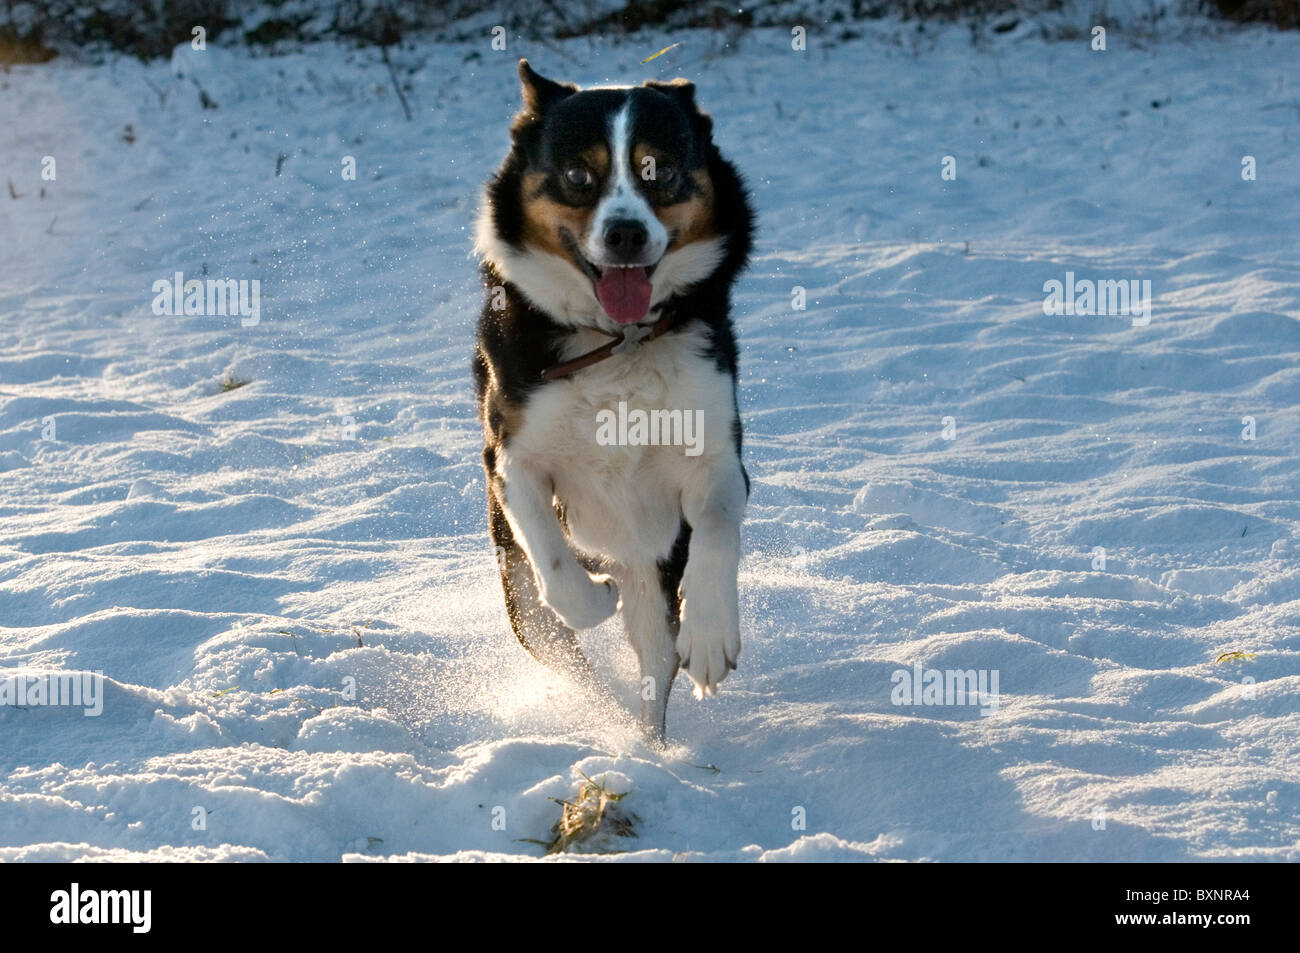 A sheep dog sprinting on the snow Stock Photo